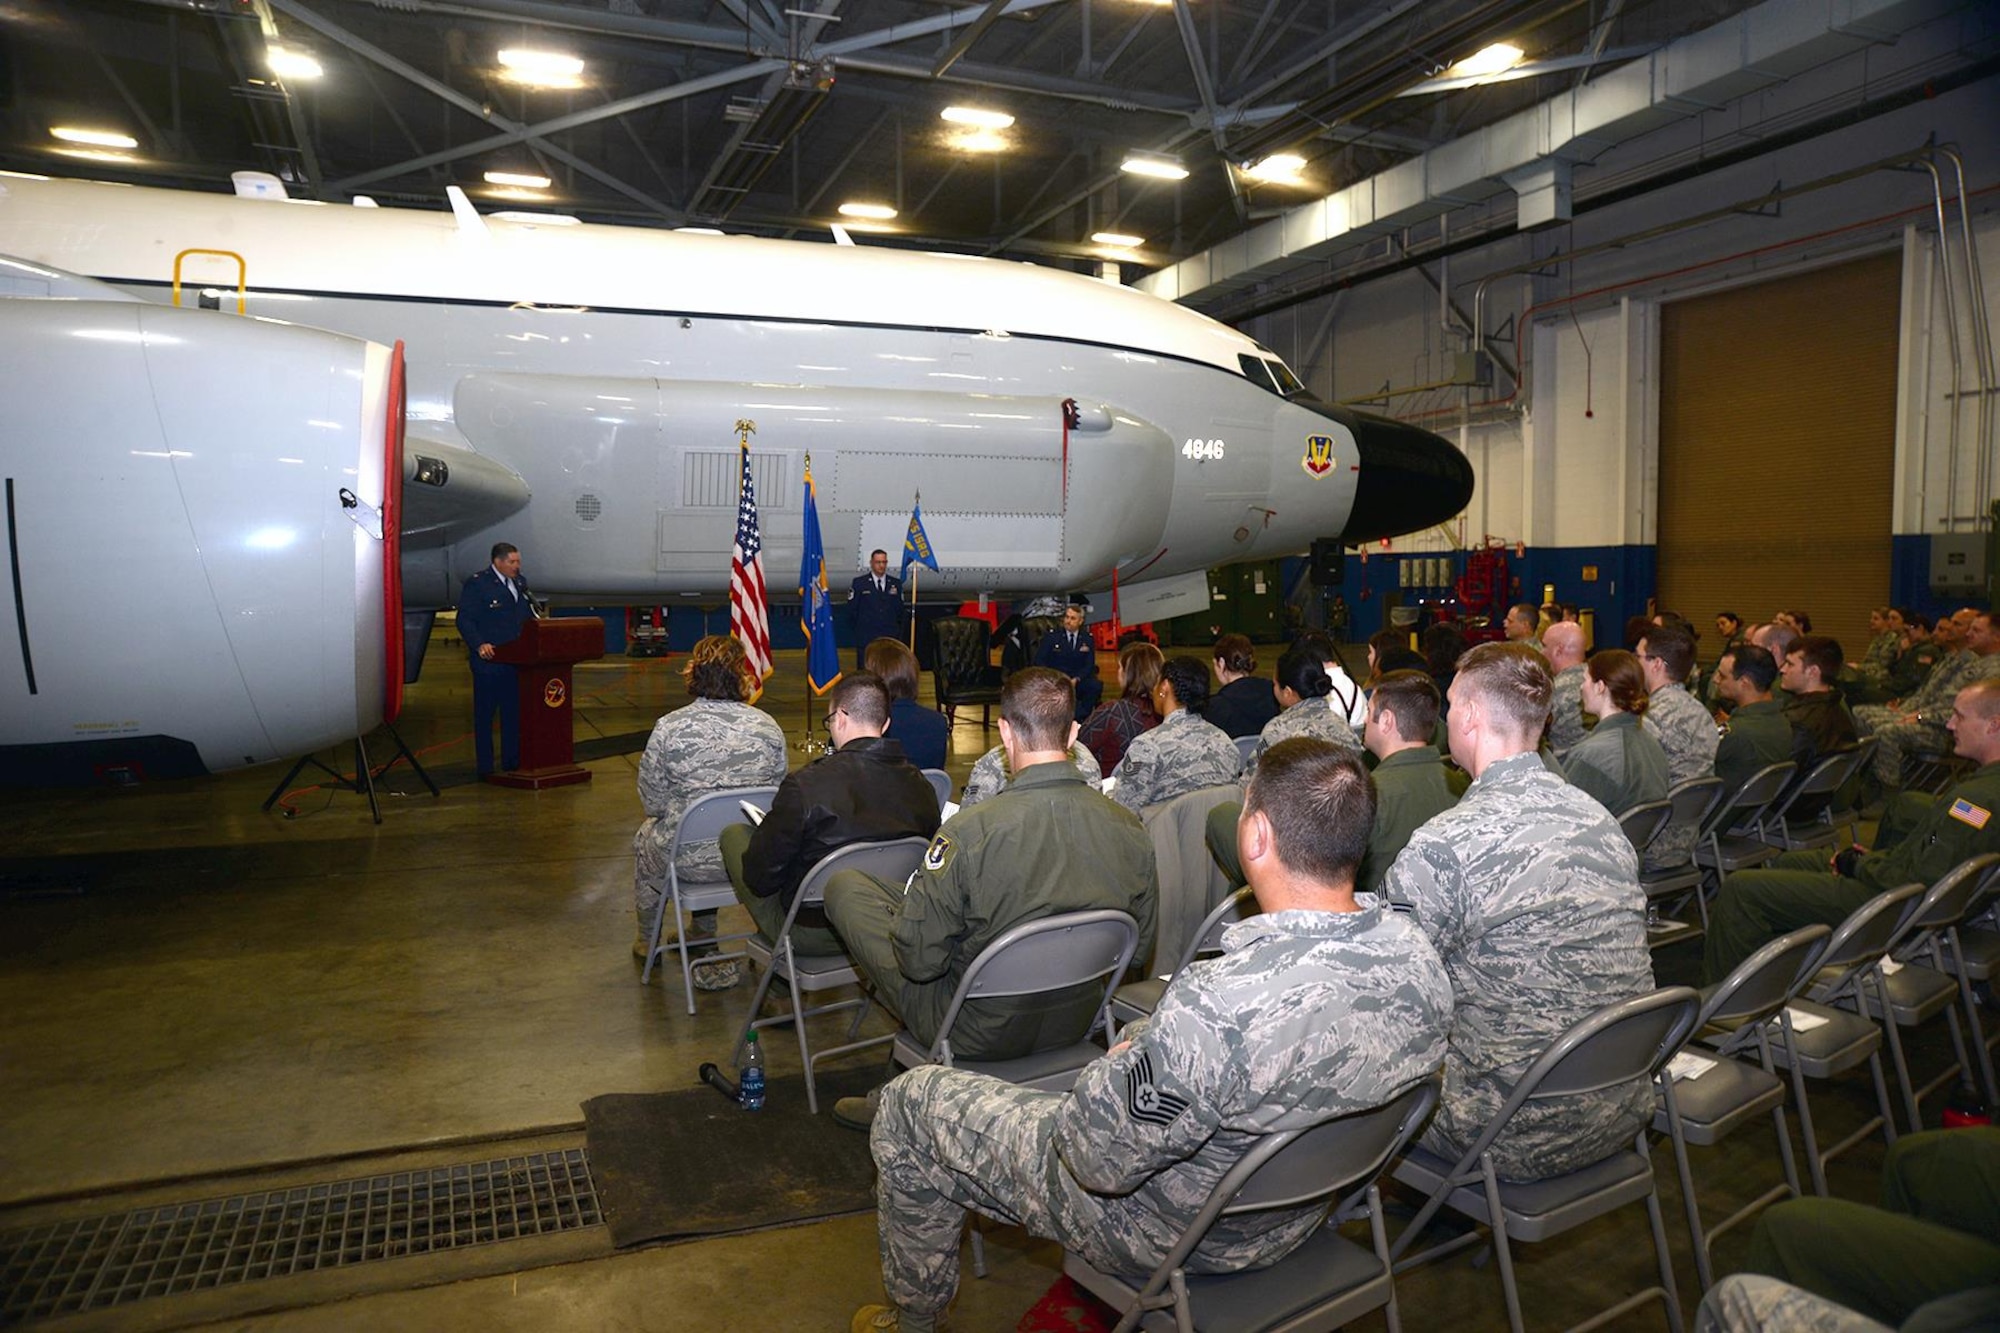 Lt. Col. Jed Snarr assumed command of the 49th Information Squadron during a ceremony held in the Bennie L. Davis Maintenance Facility at Offutt Air Force Base, Neb.